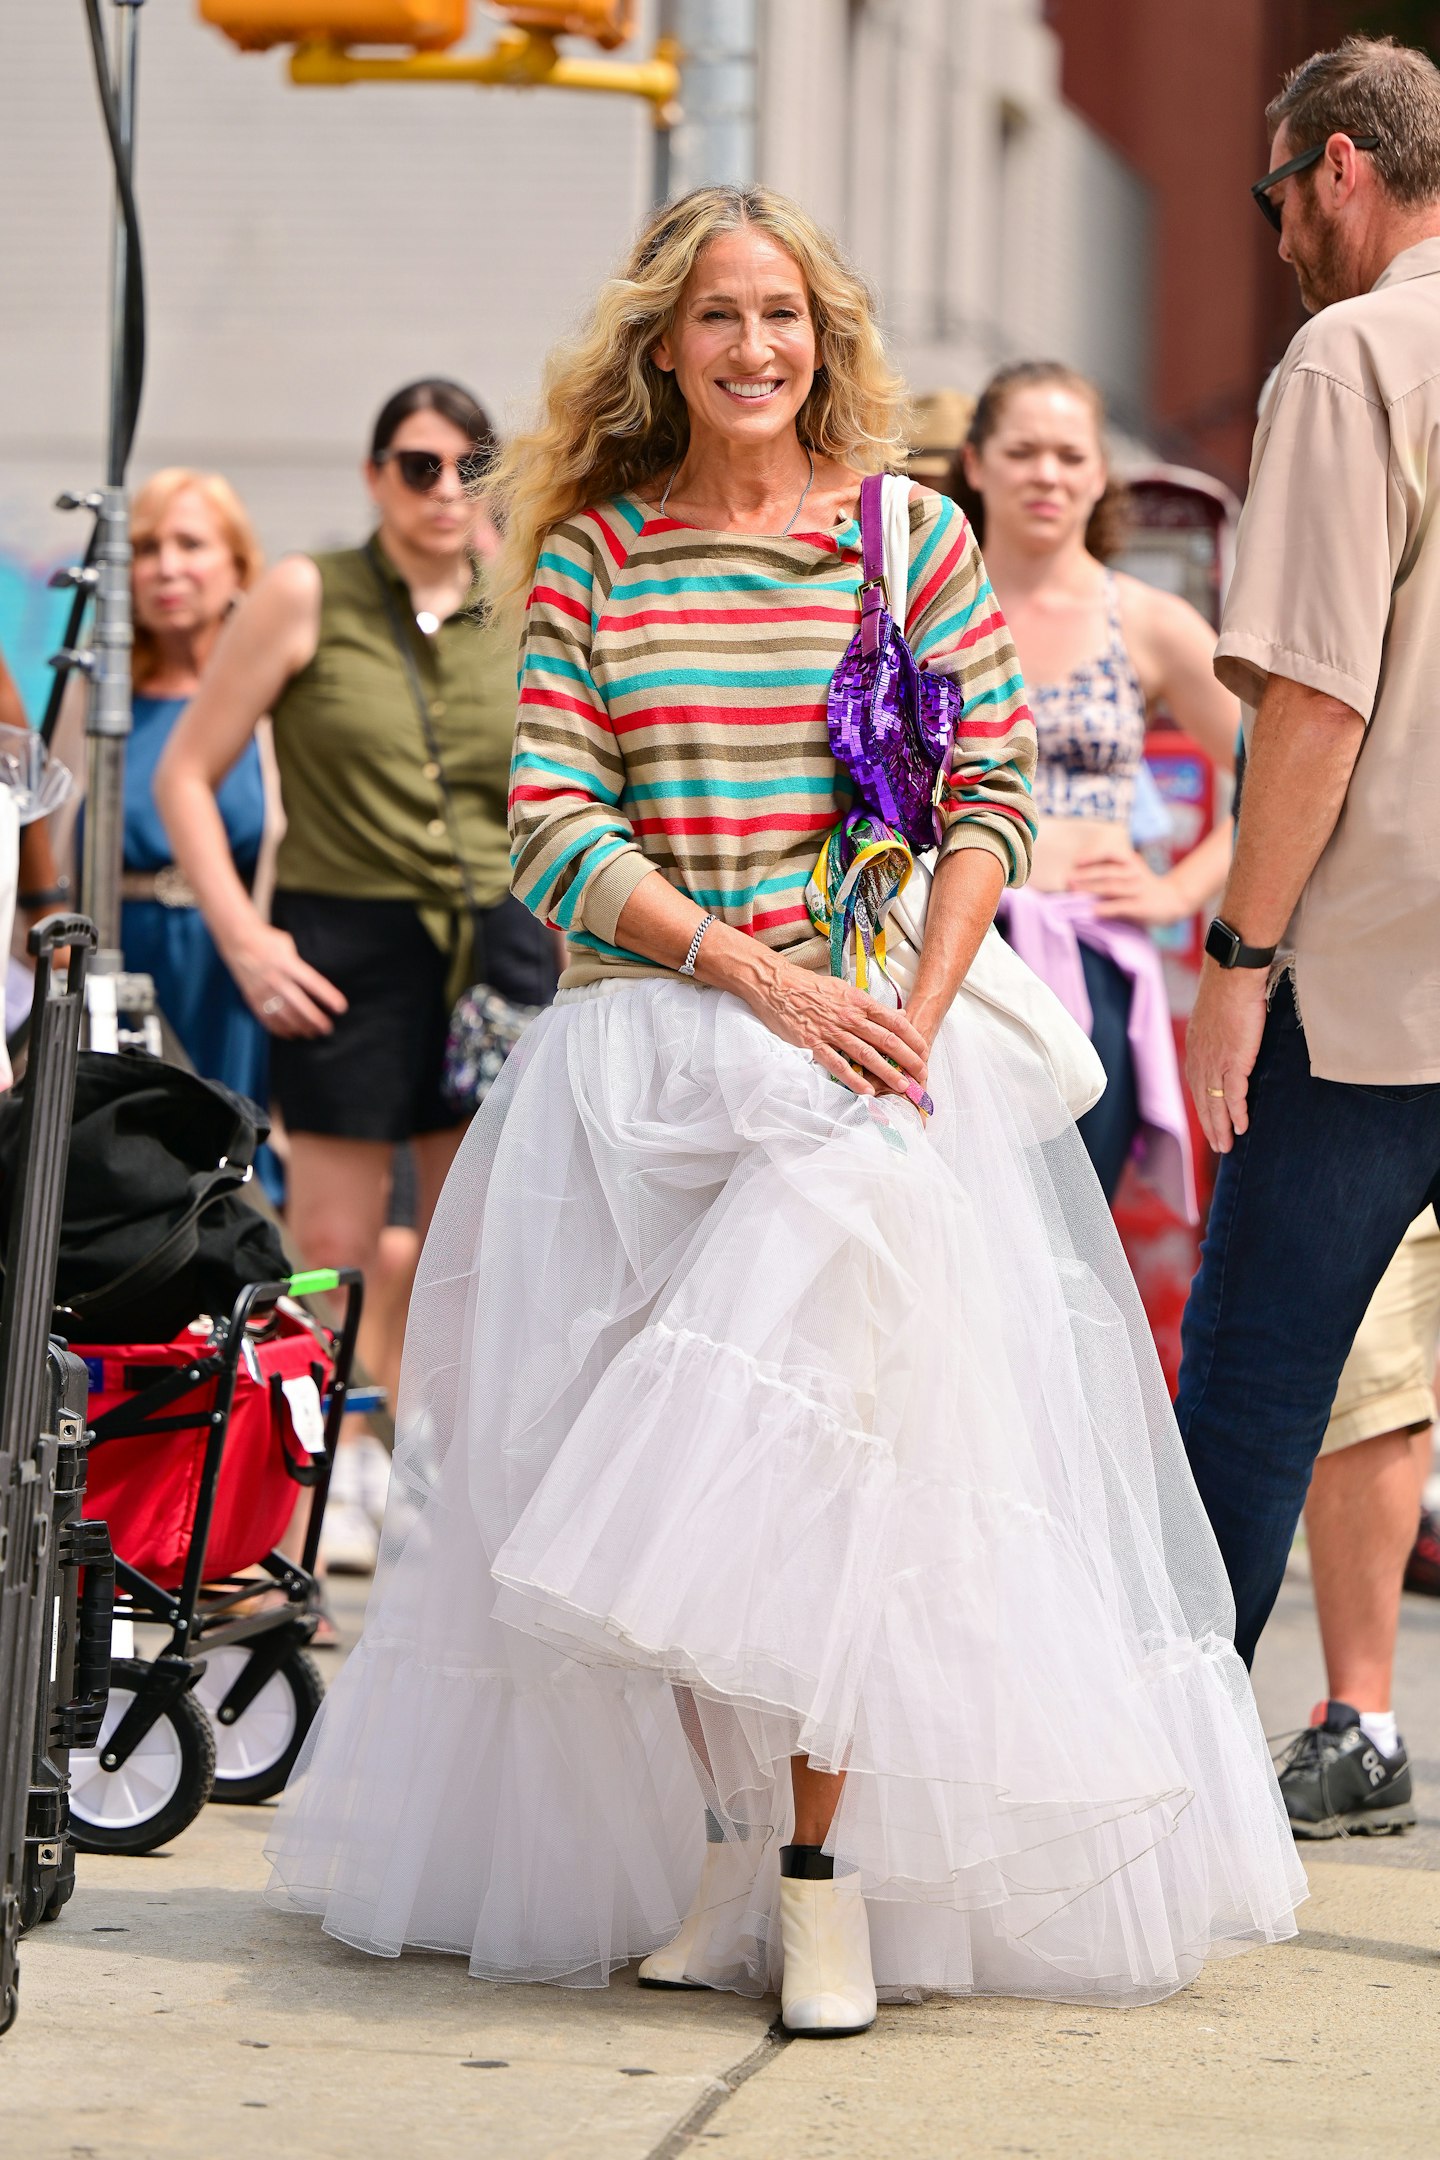 Bridget Moynahan Spotted on the Set of the Sex and the City Revival